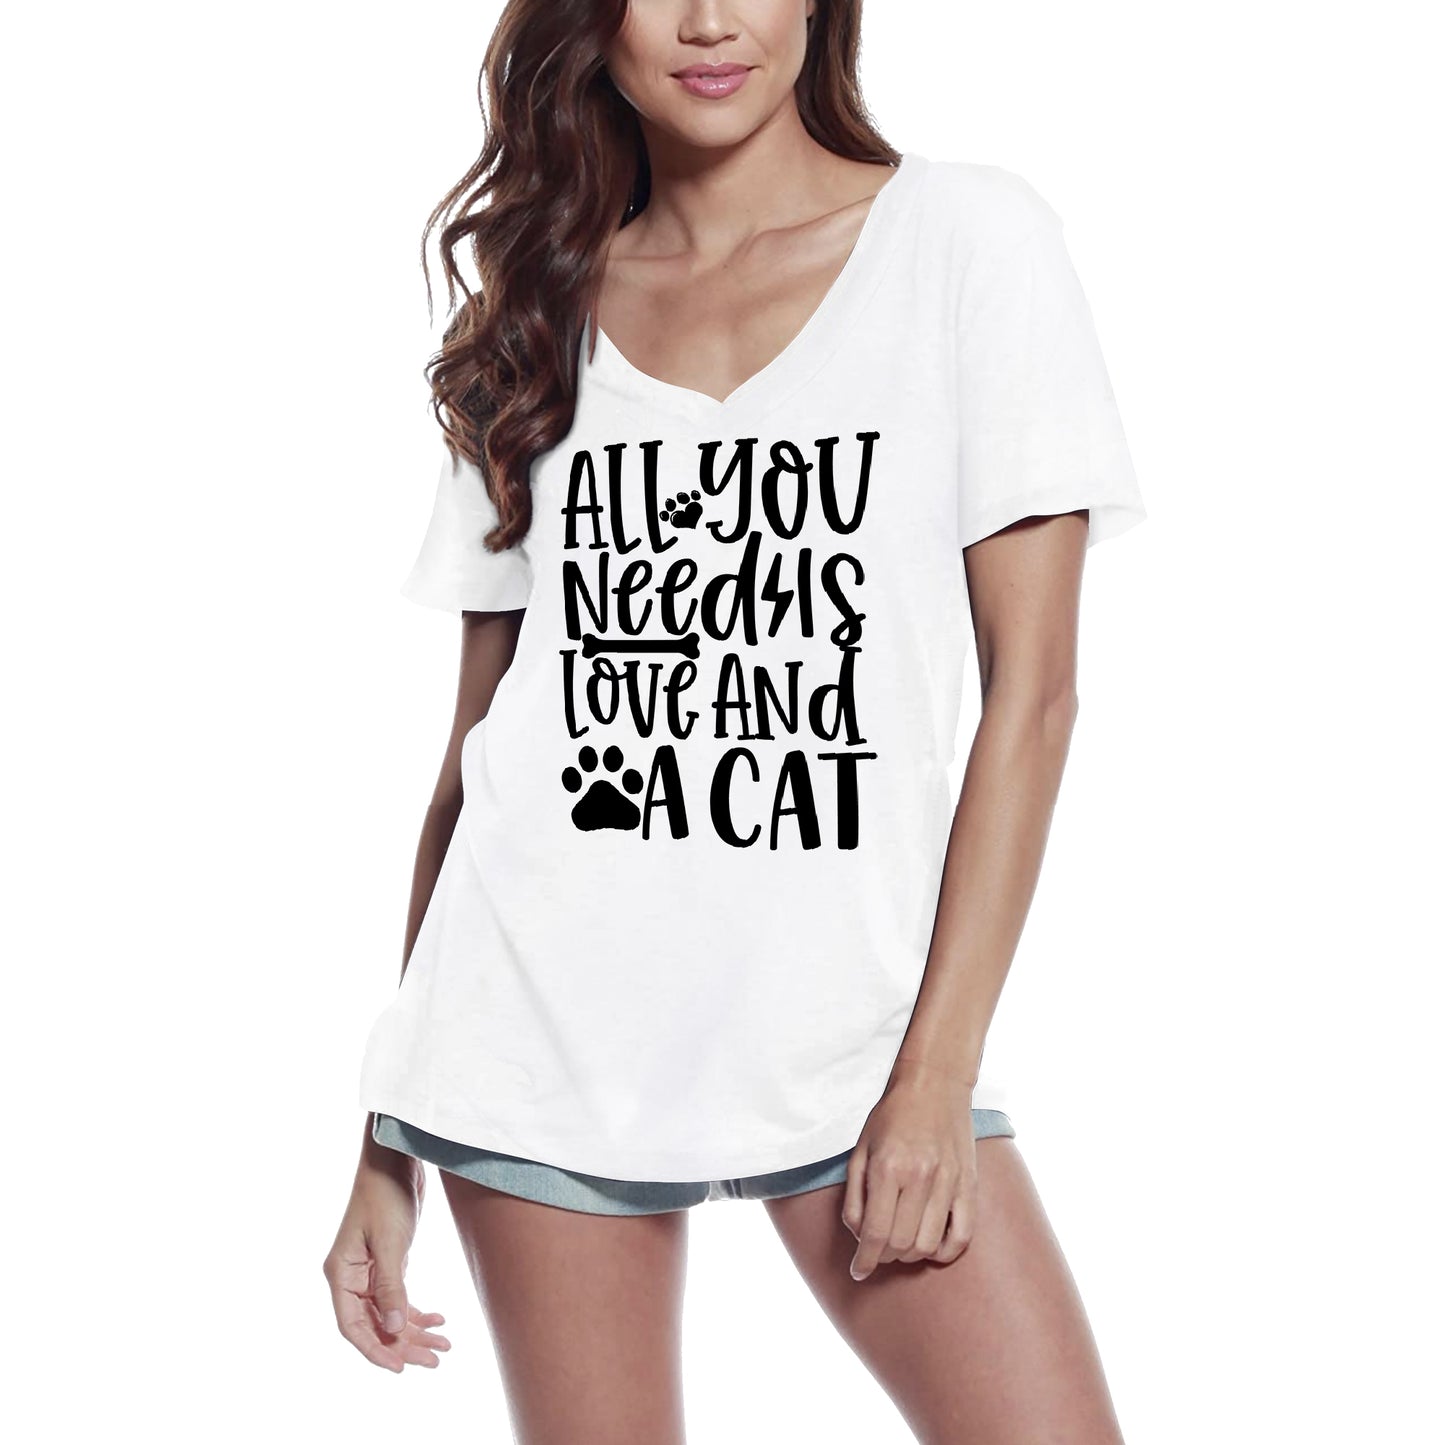 ULTRABASIC Women's T-Shirt All You Need Is Love and a Cat - Short Sleeve Tee Shirt Tops